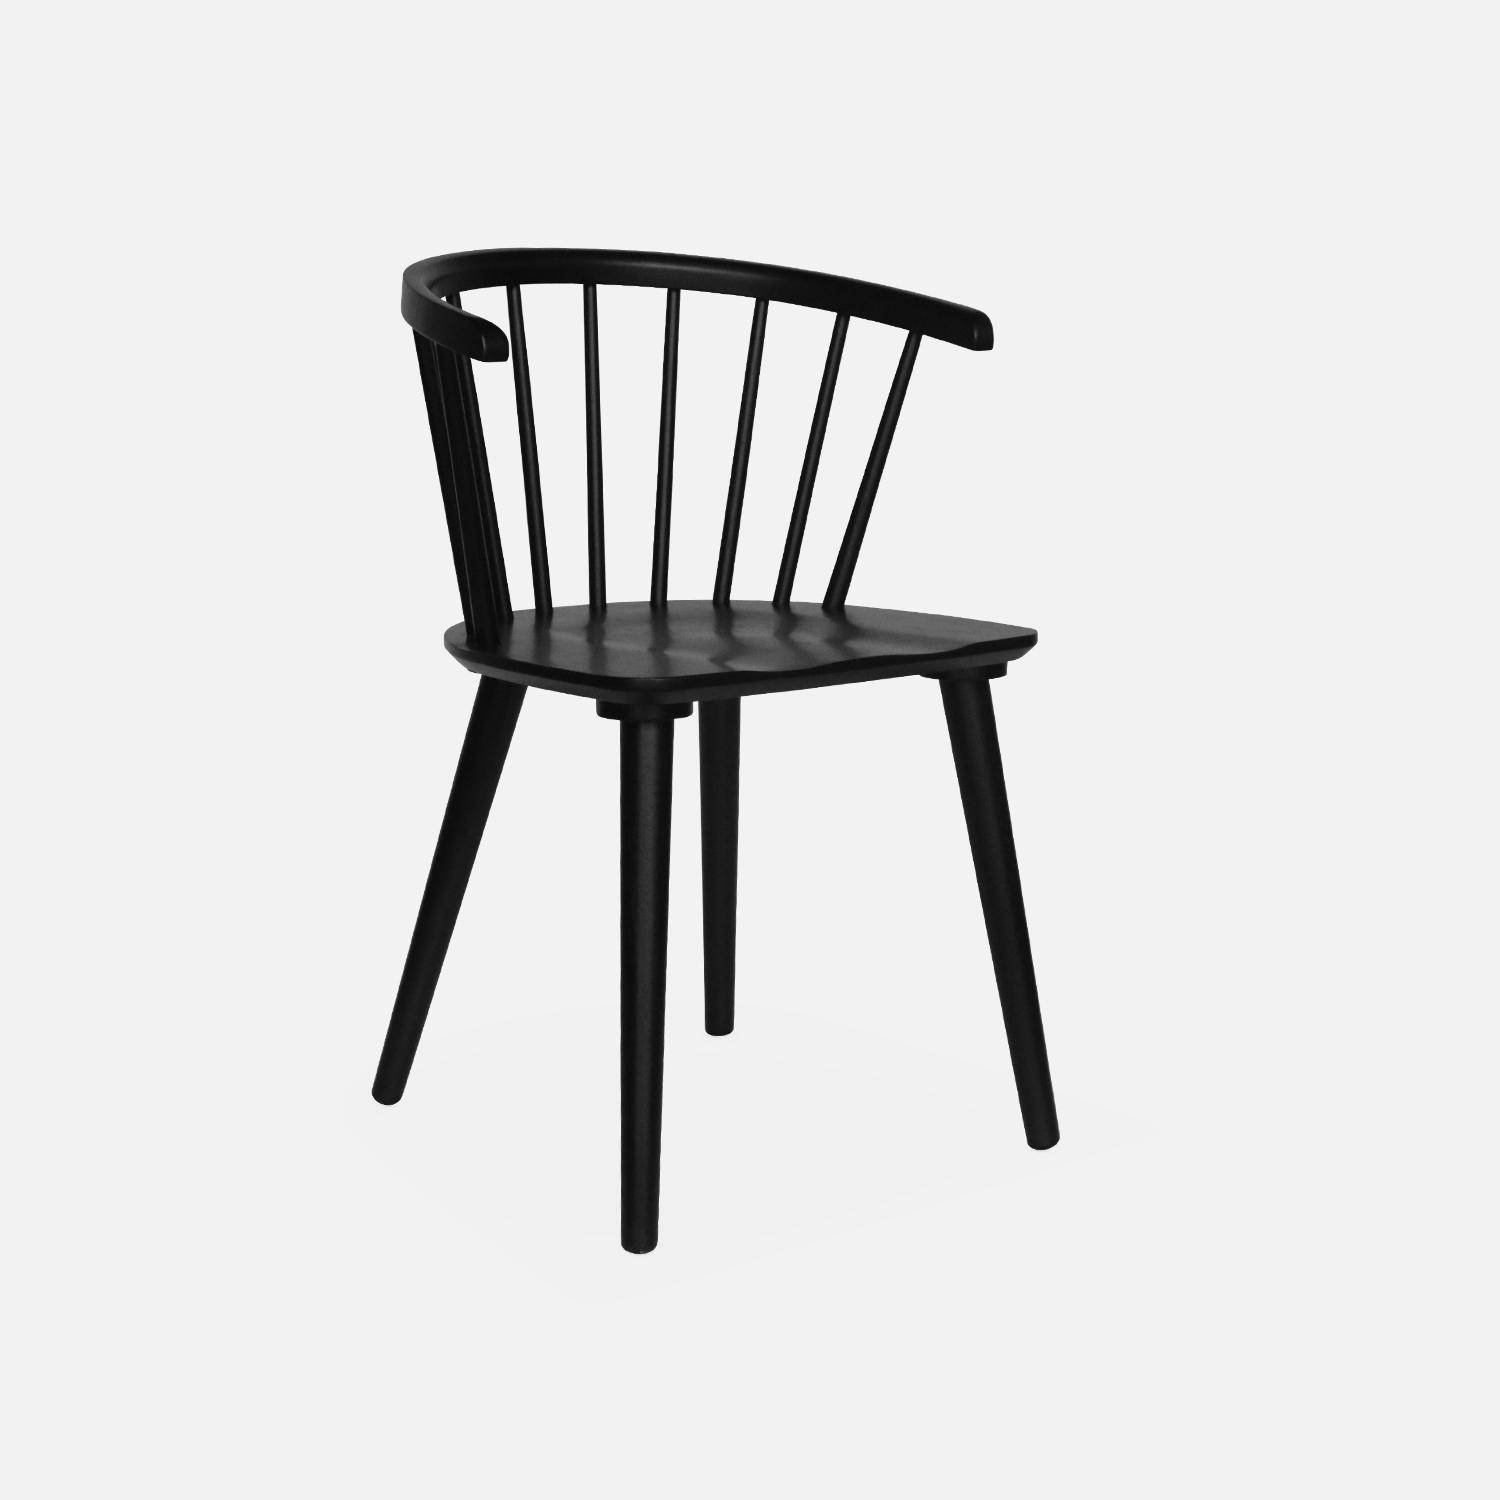 Pair of  Wood and Plywood Spindle Chairs, black, L53 x W47.5 x H76cm ,sweeek,Photo4